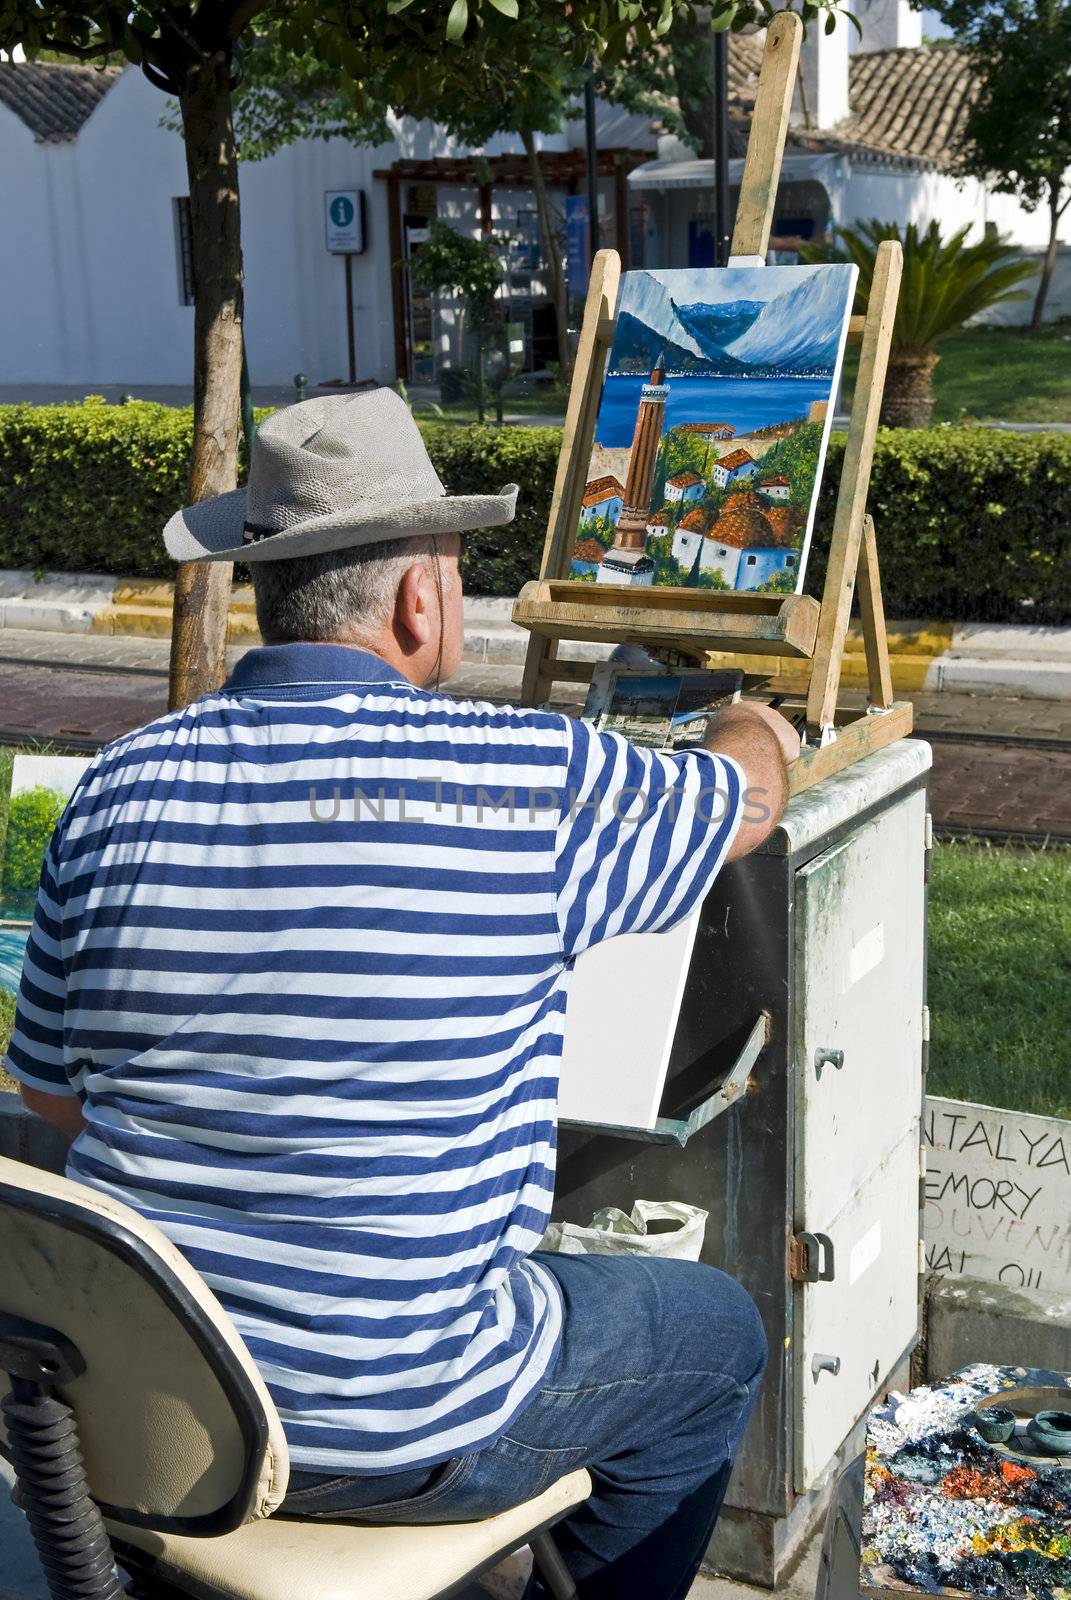 Artist is painting at the street.